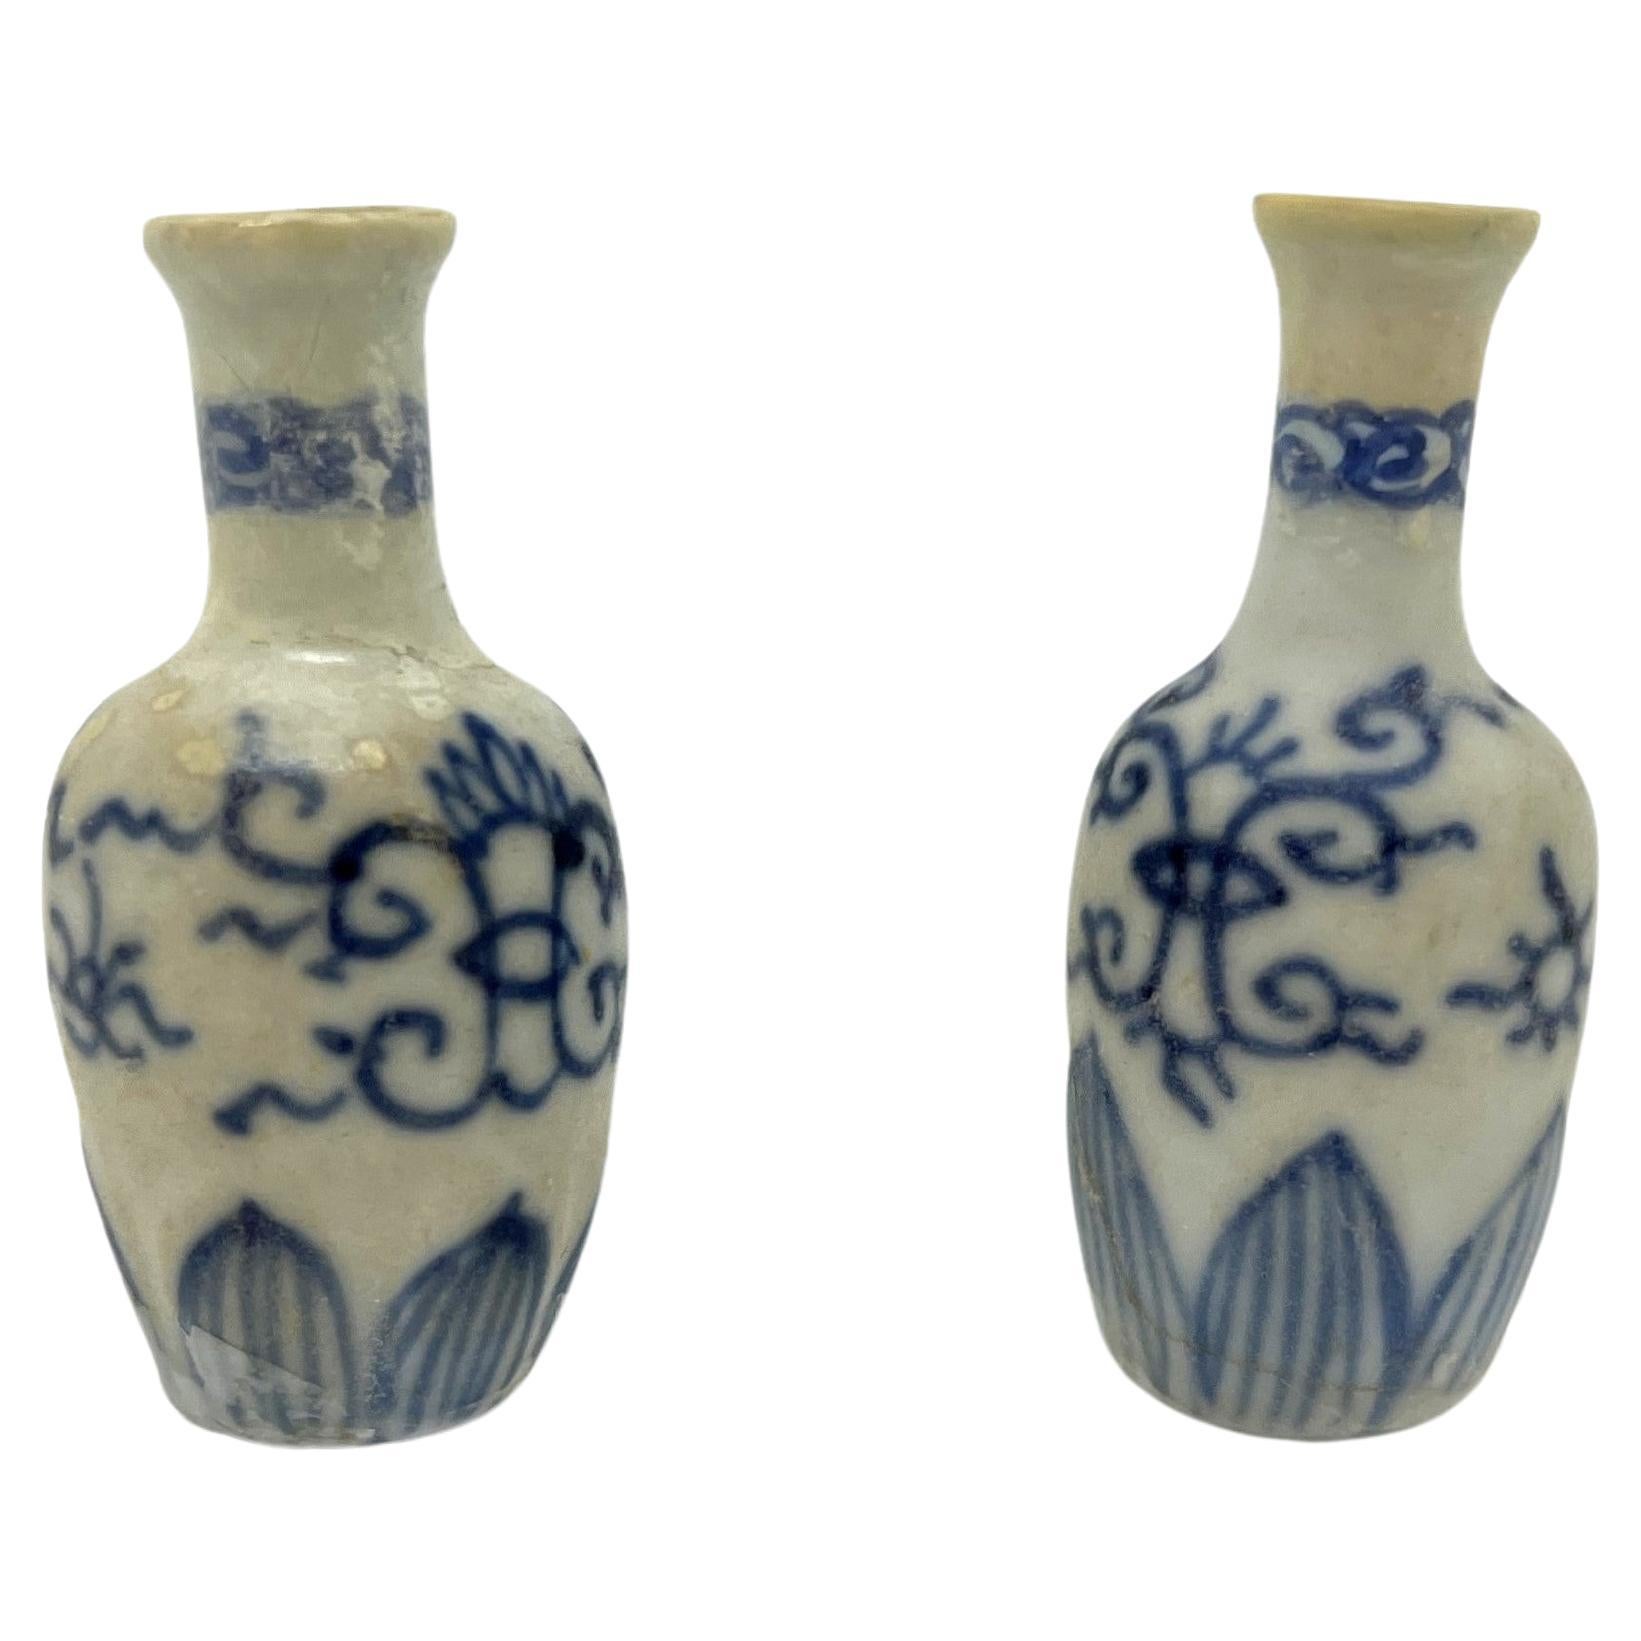 Two Blue and White Miniature Vases, C 1725, Qing Dynasty, Yongzheng Era